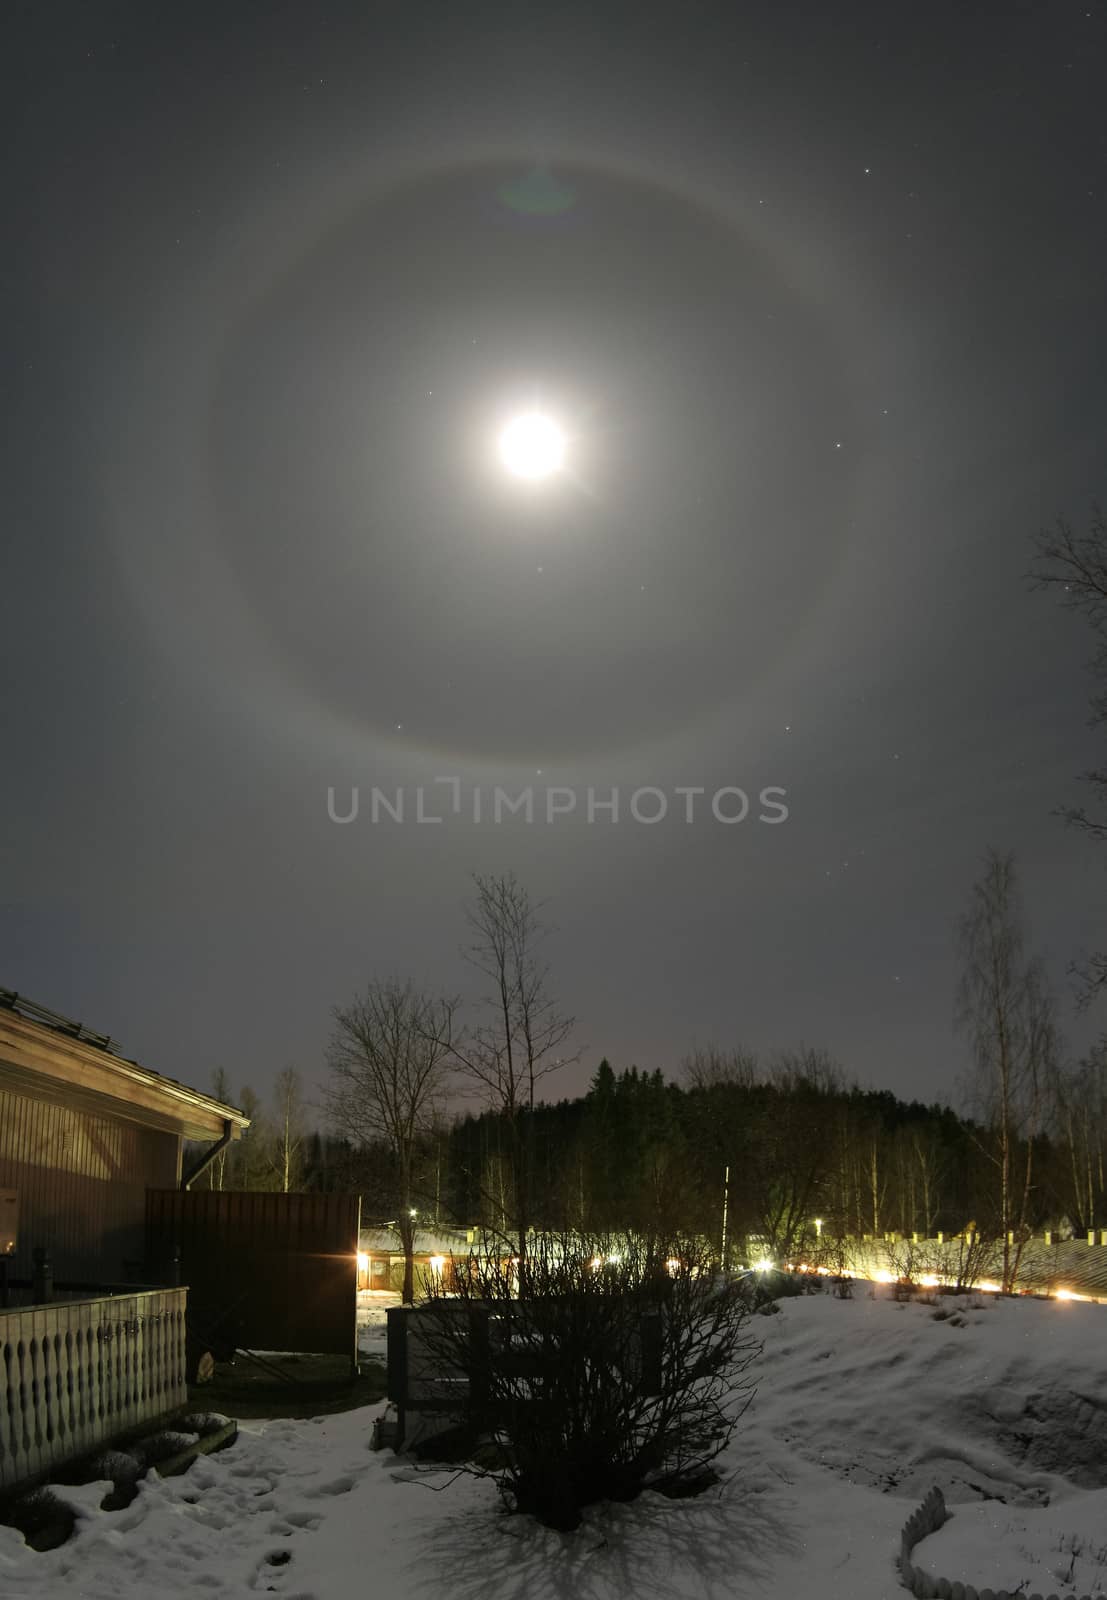 22 degree halo and moon by juhku